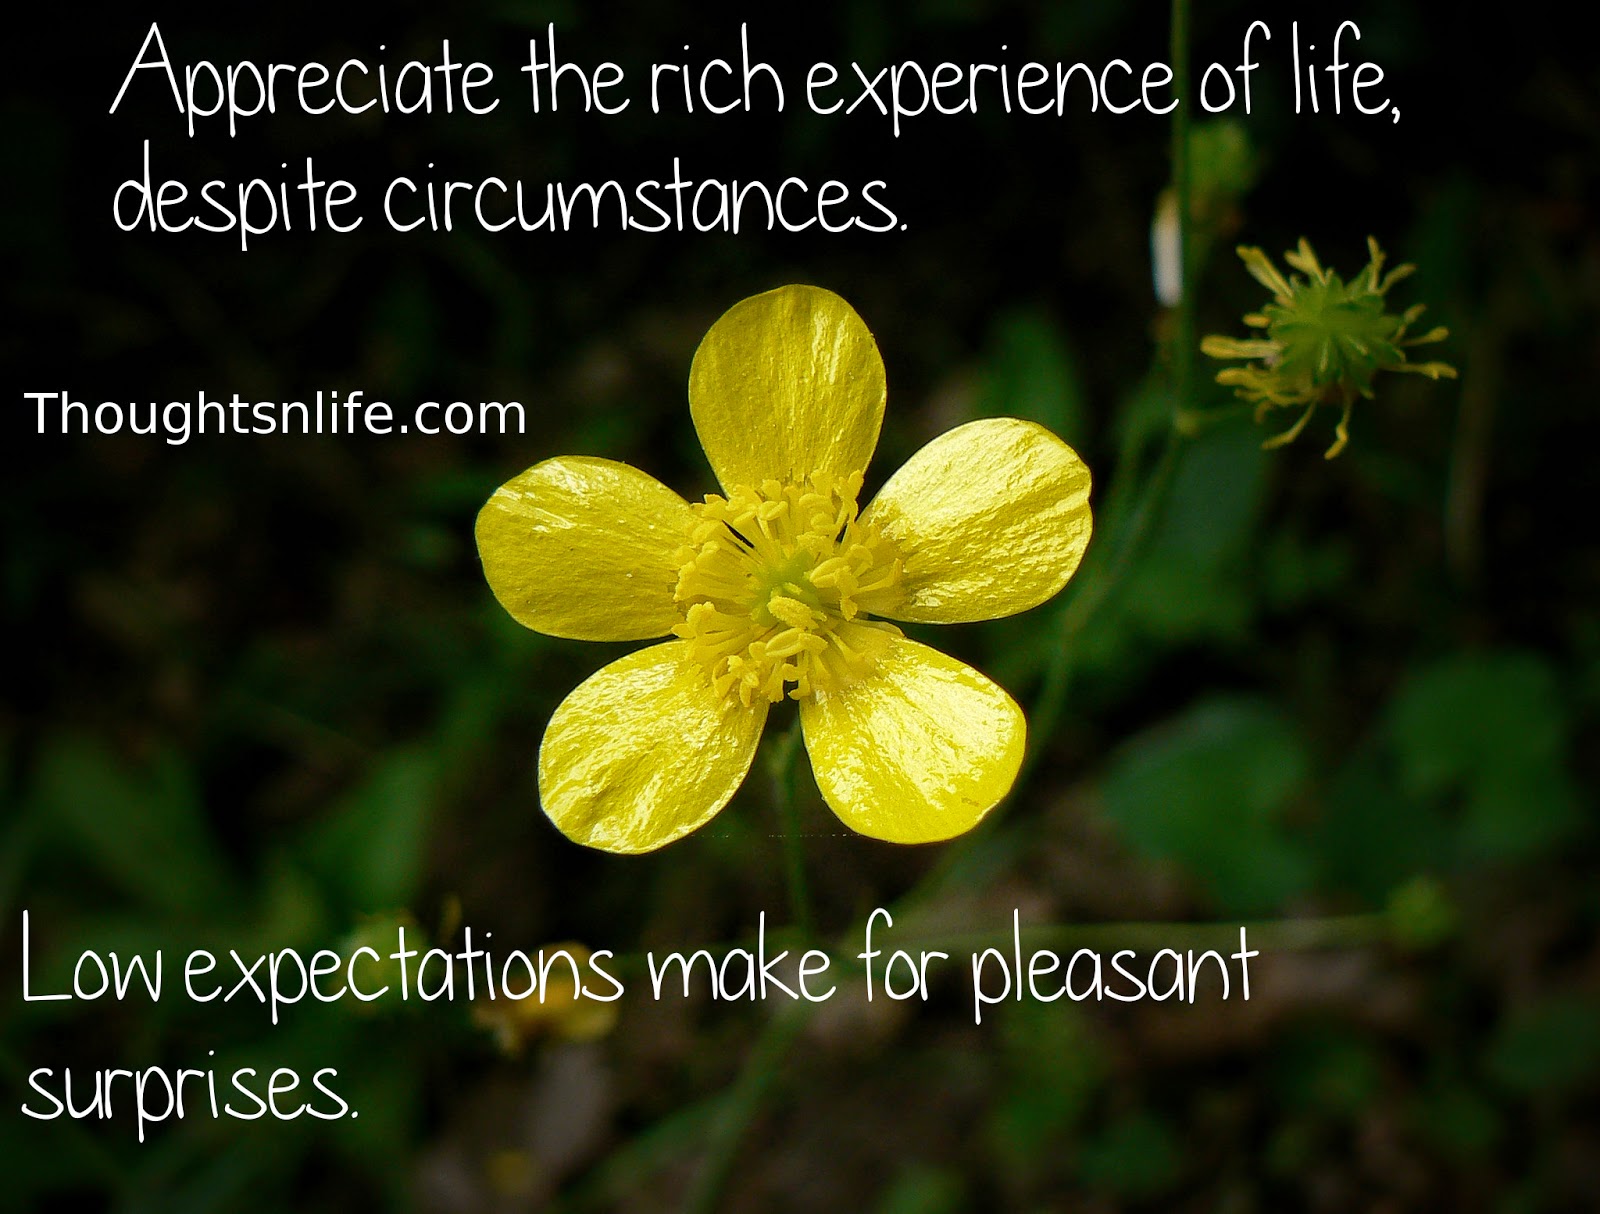 Appreciate the rich experience of life, despite circumstances. Low expectations make for pleasant surprises. #life #lifequotes #enjoylife #grattitude